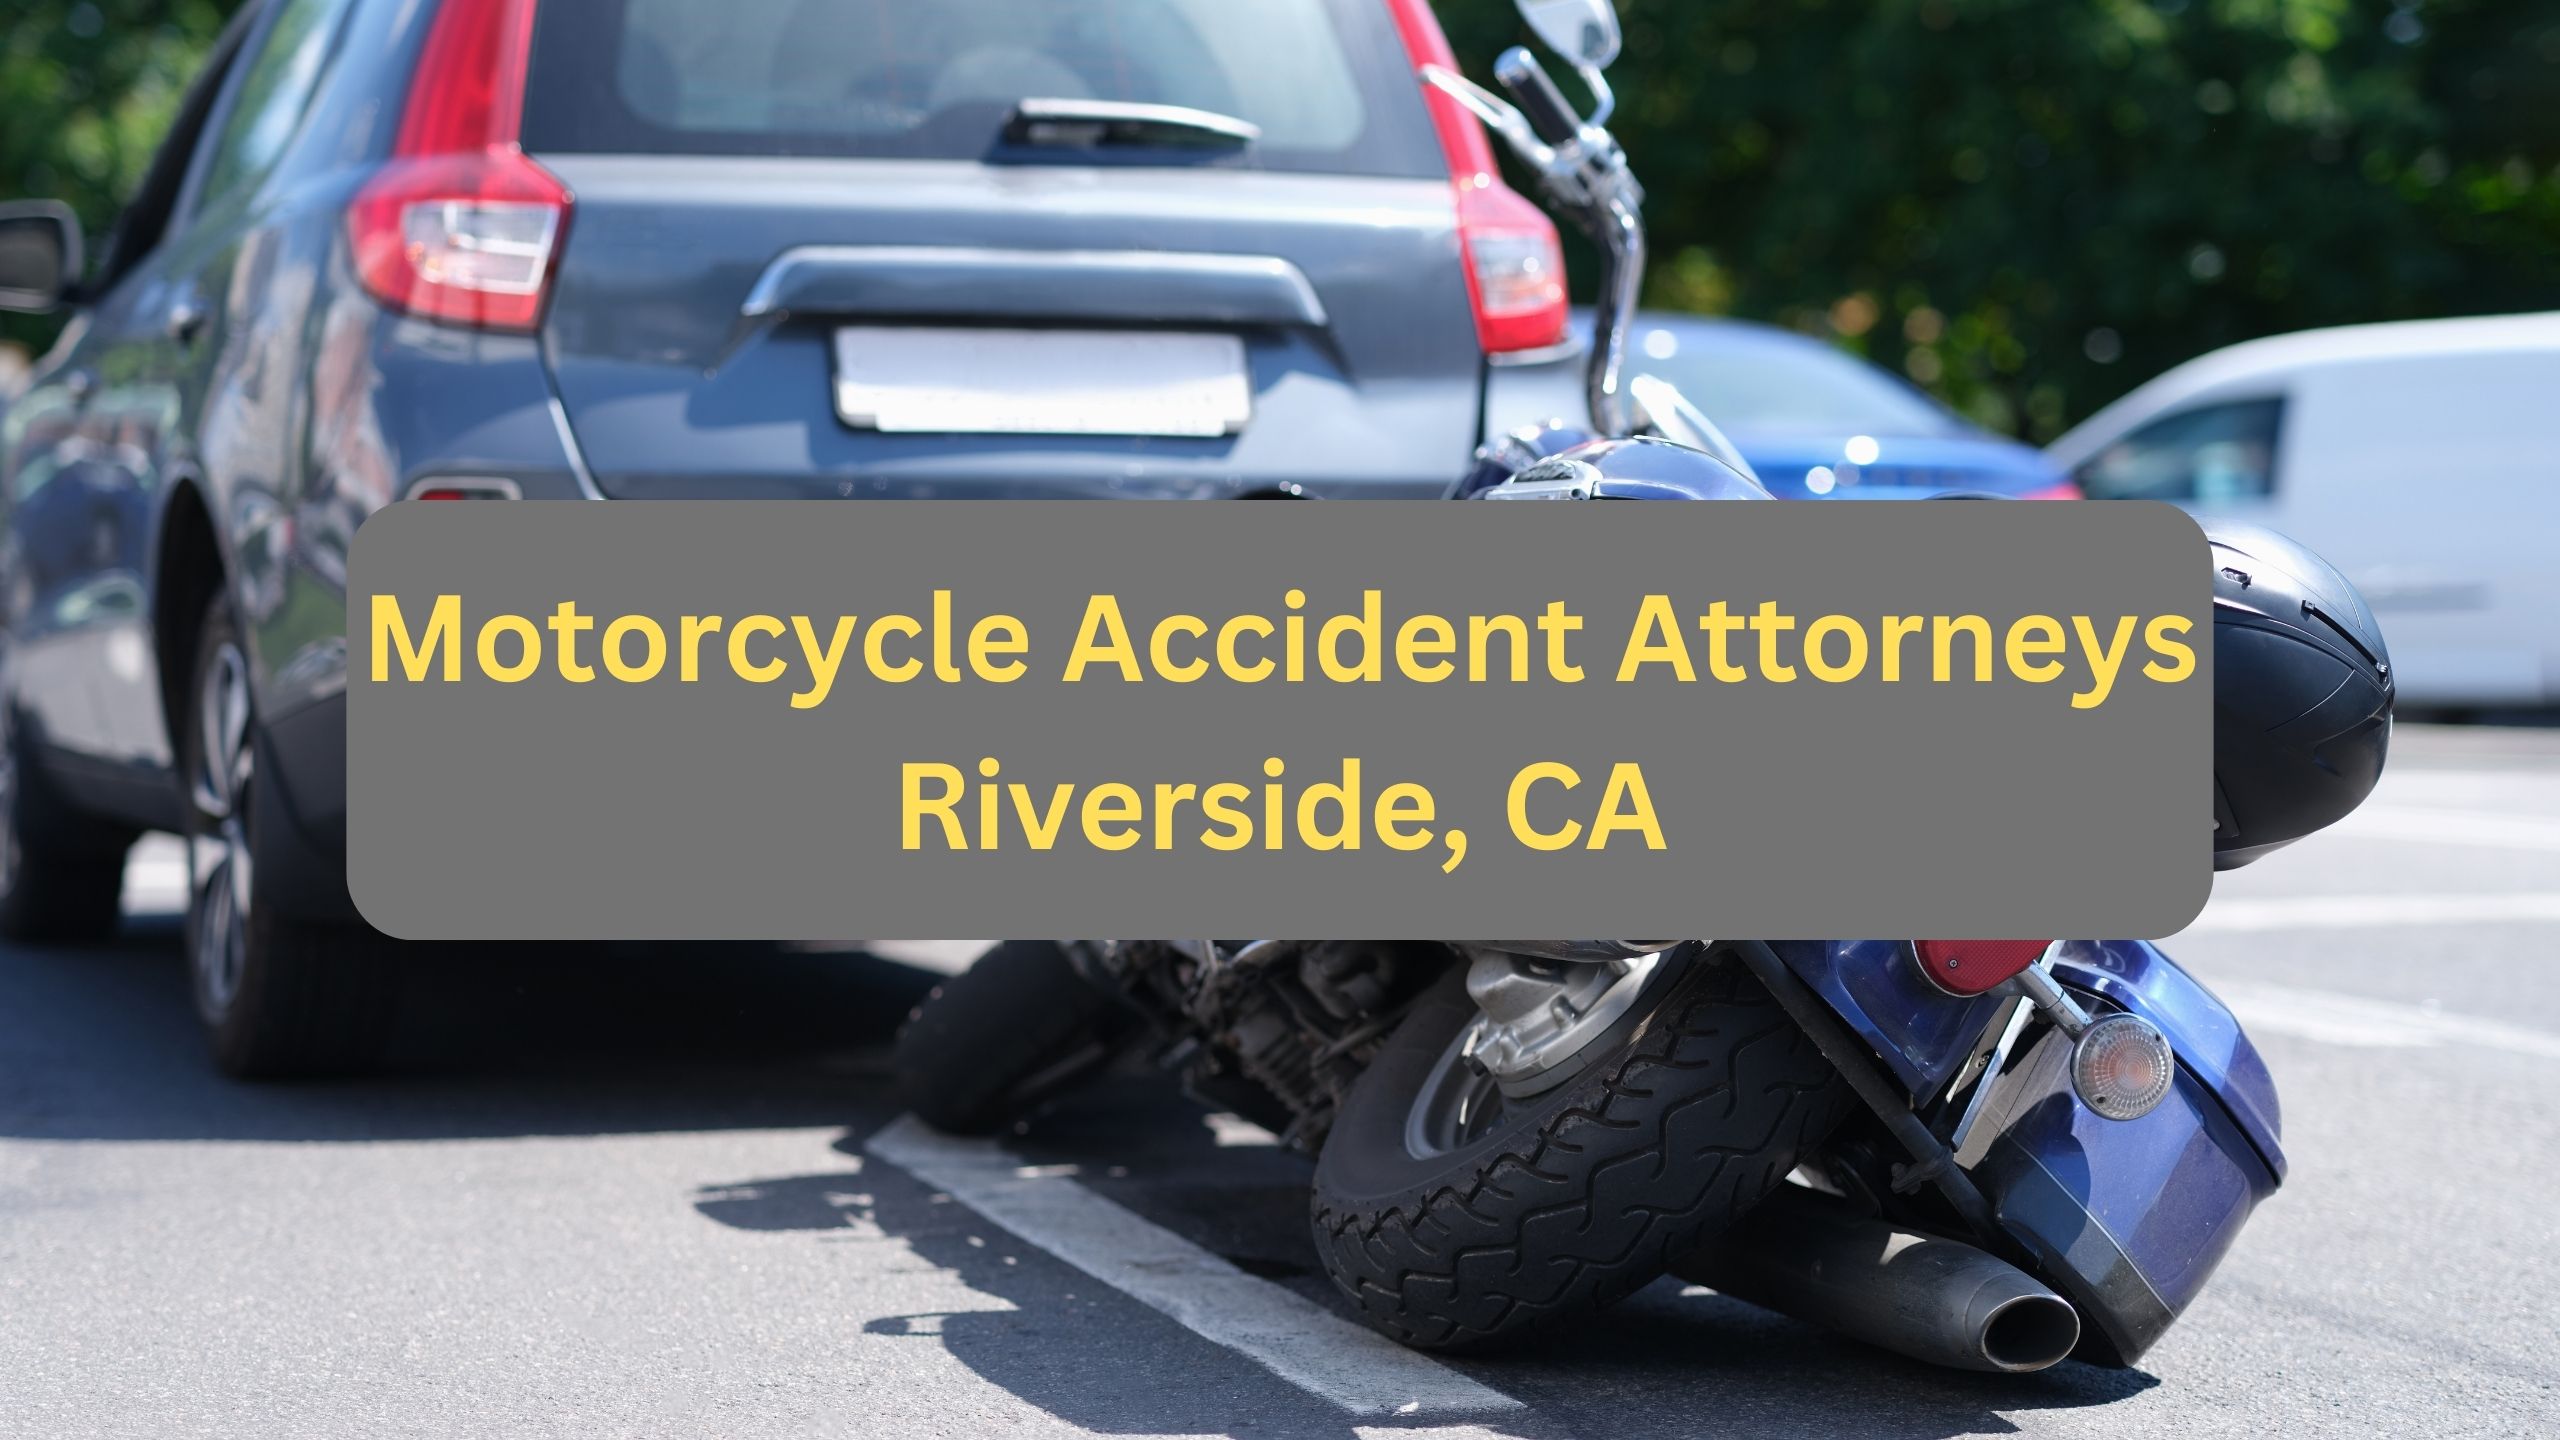 Motorcycle Accident Attorneys Riverside